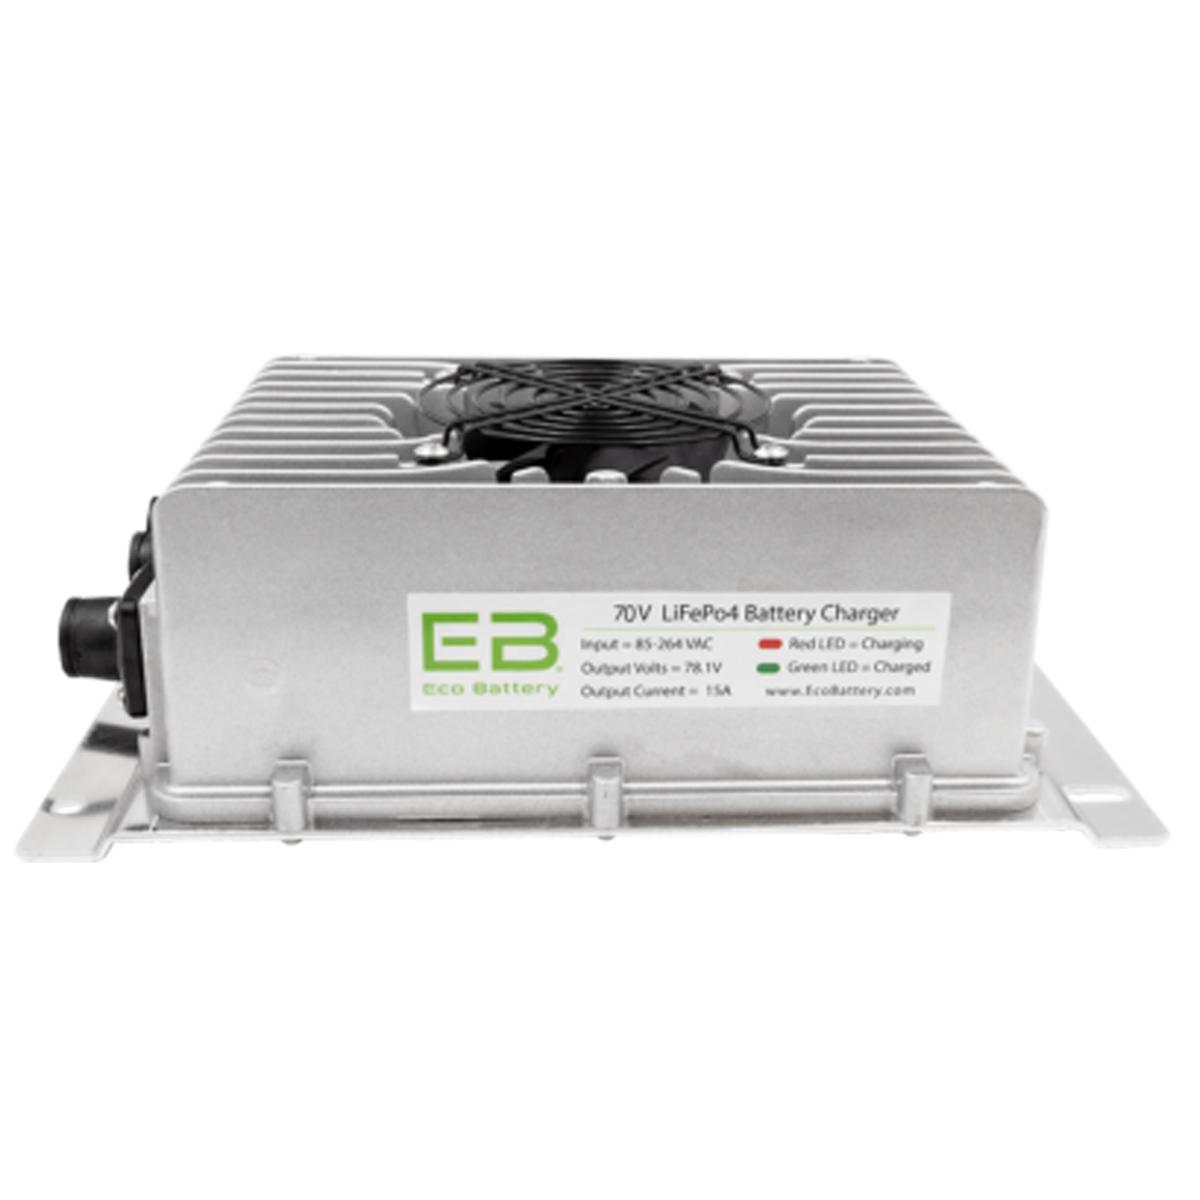 Eco Battery 70V 105AH Kit with Charger